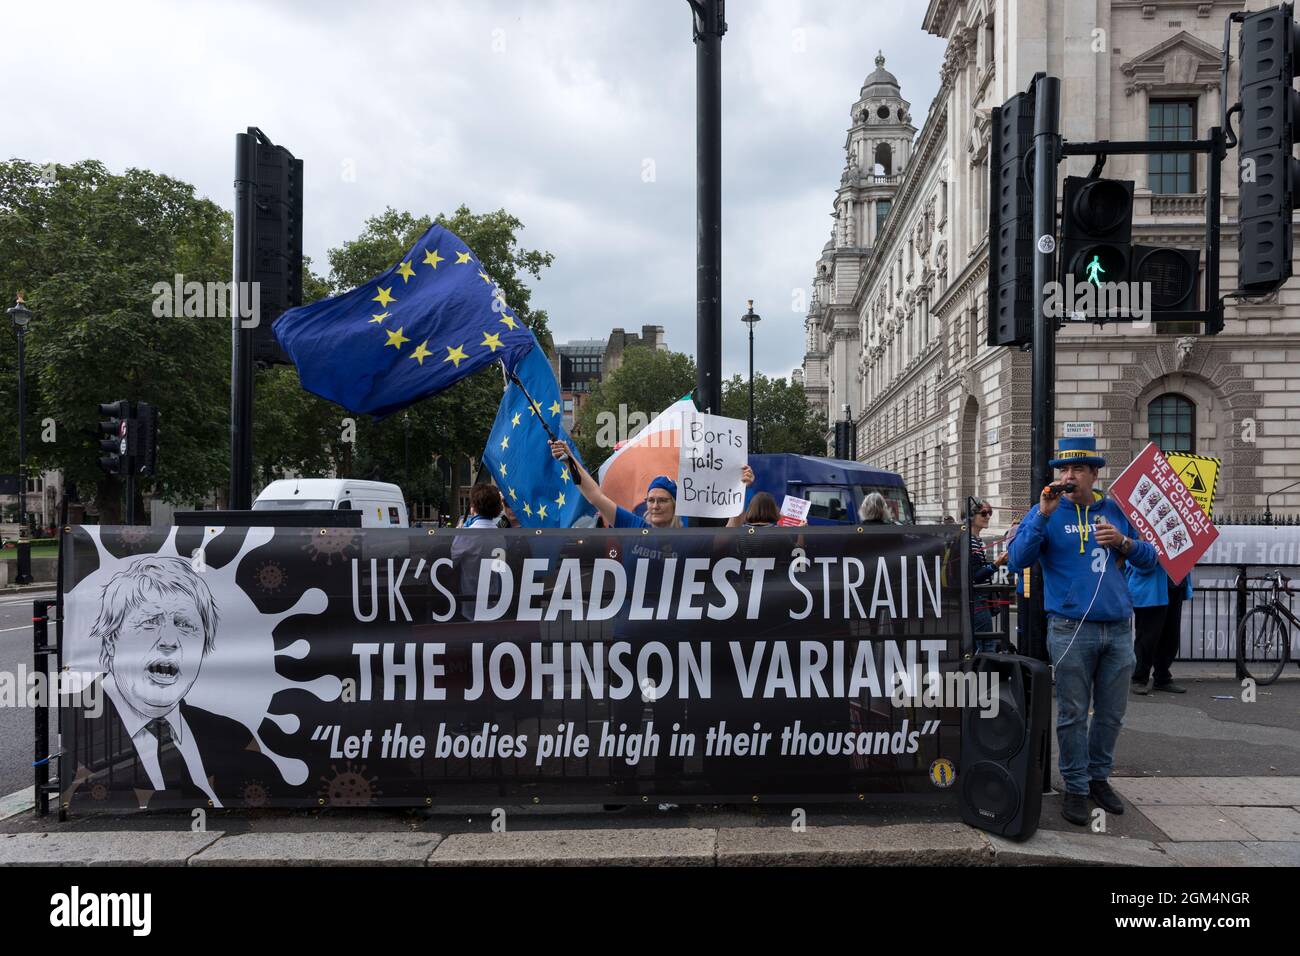 London, UK. 15th Sep, 2021. Protestors hanging a banner that says 'UK's deadliest strain the Johnson variant' and a placard that says 'Boris fails Britain' during the demonstration.Called by SODEM, Stand of Defiance European Movement, a group of anti-brexiters gathered at Westminster to protest the Boris Johnson government. They strive to deliver the message that Brexit was not the will of the people to the incumbent UK government. (Photo by Belinda Jiao/SOPA Images/Sipa USA) Credit: Sipa USA/Alamy Live News Stock Photo